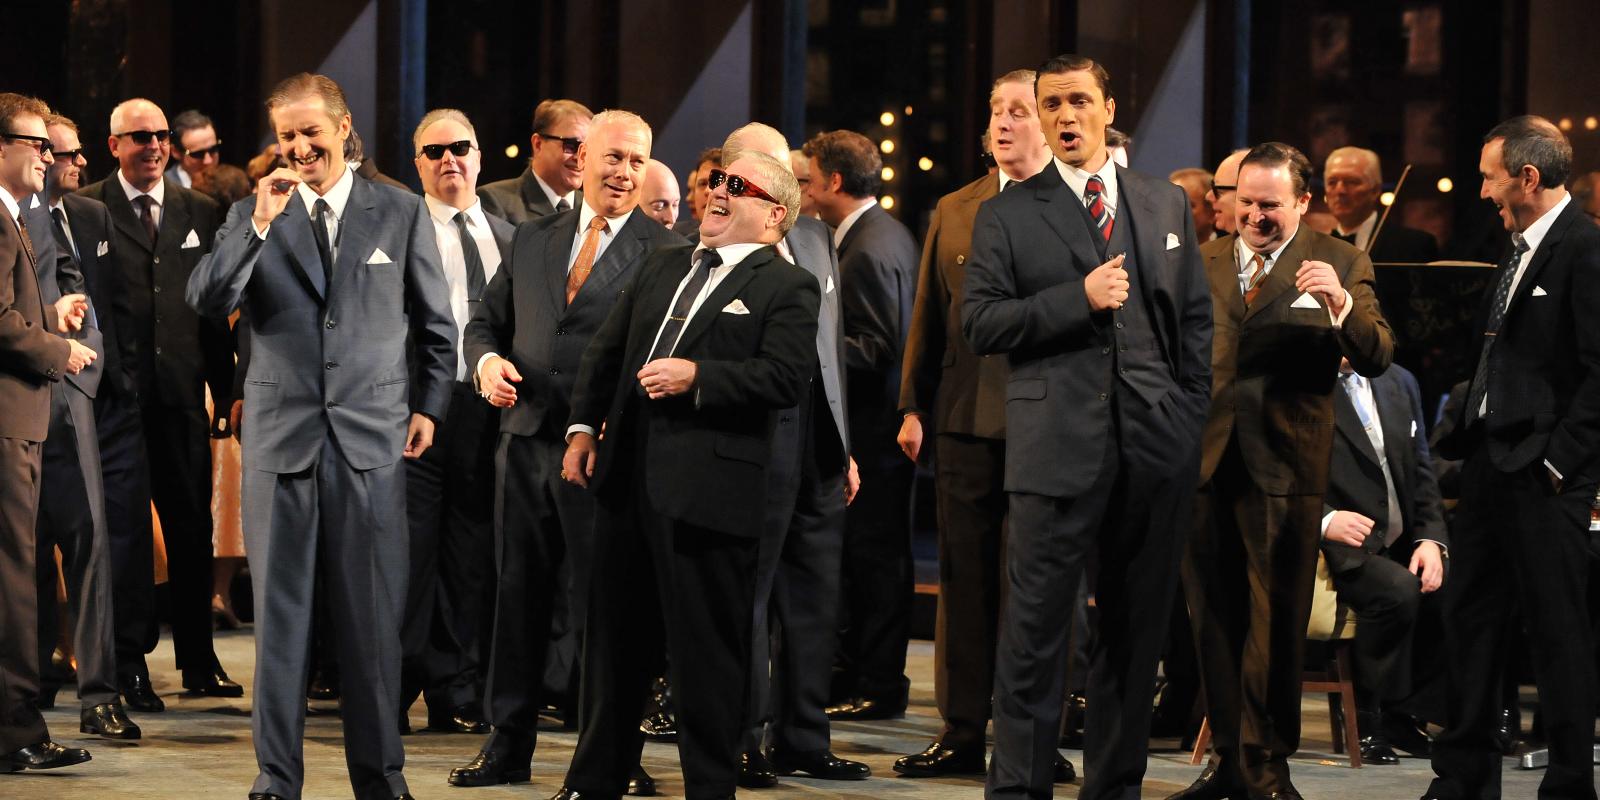 male chorus from rigoletto performing on stage in suits